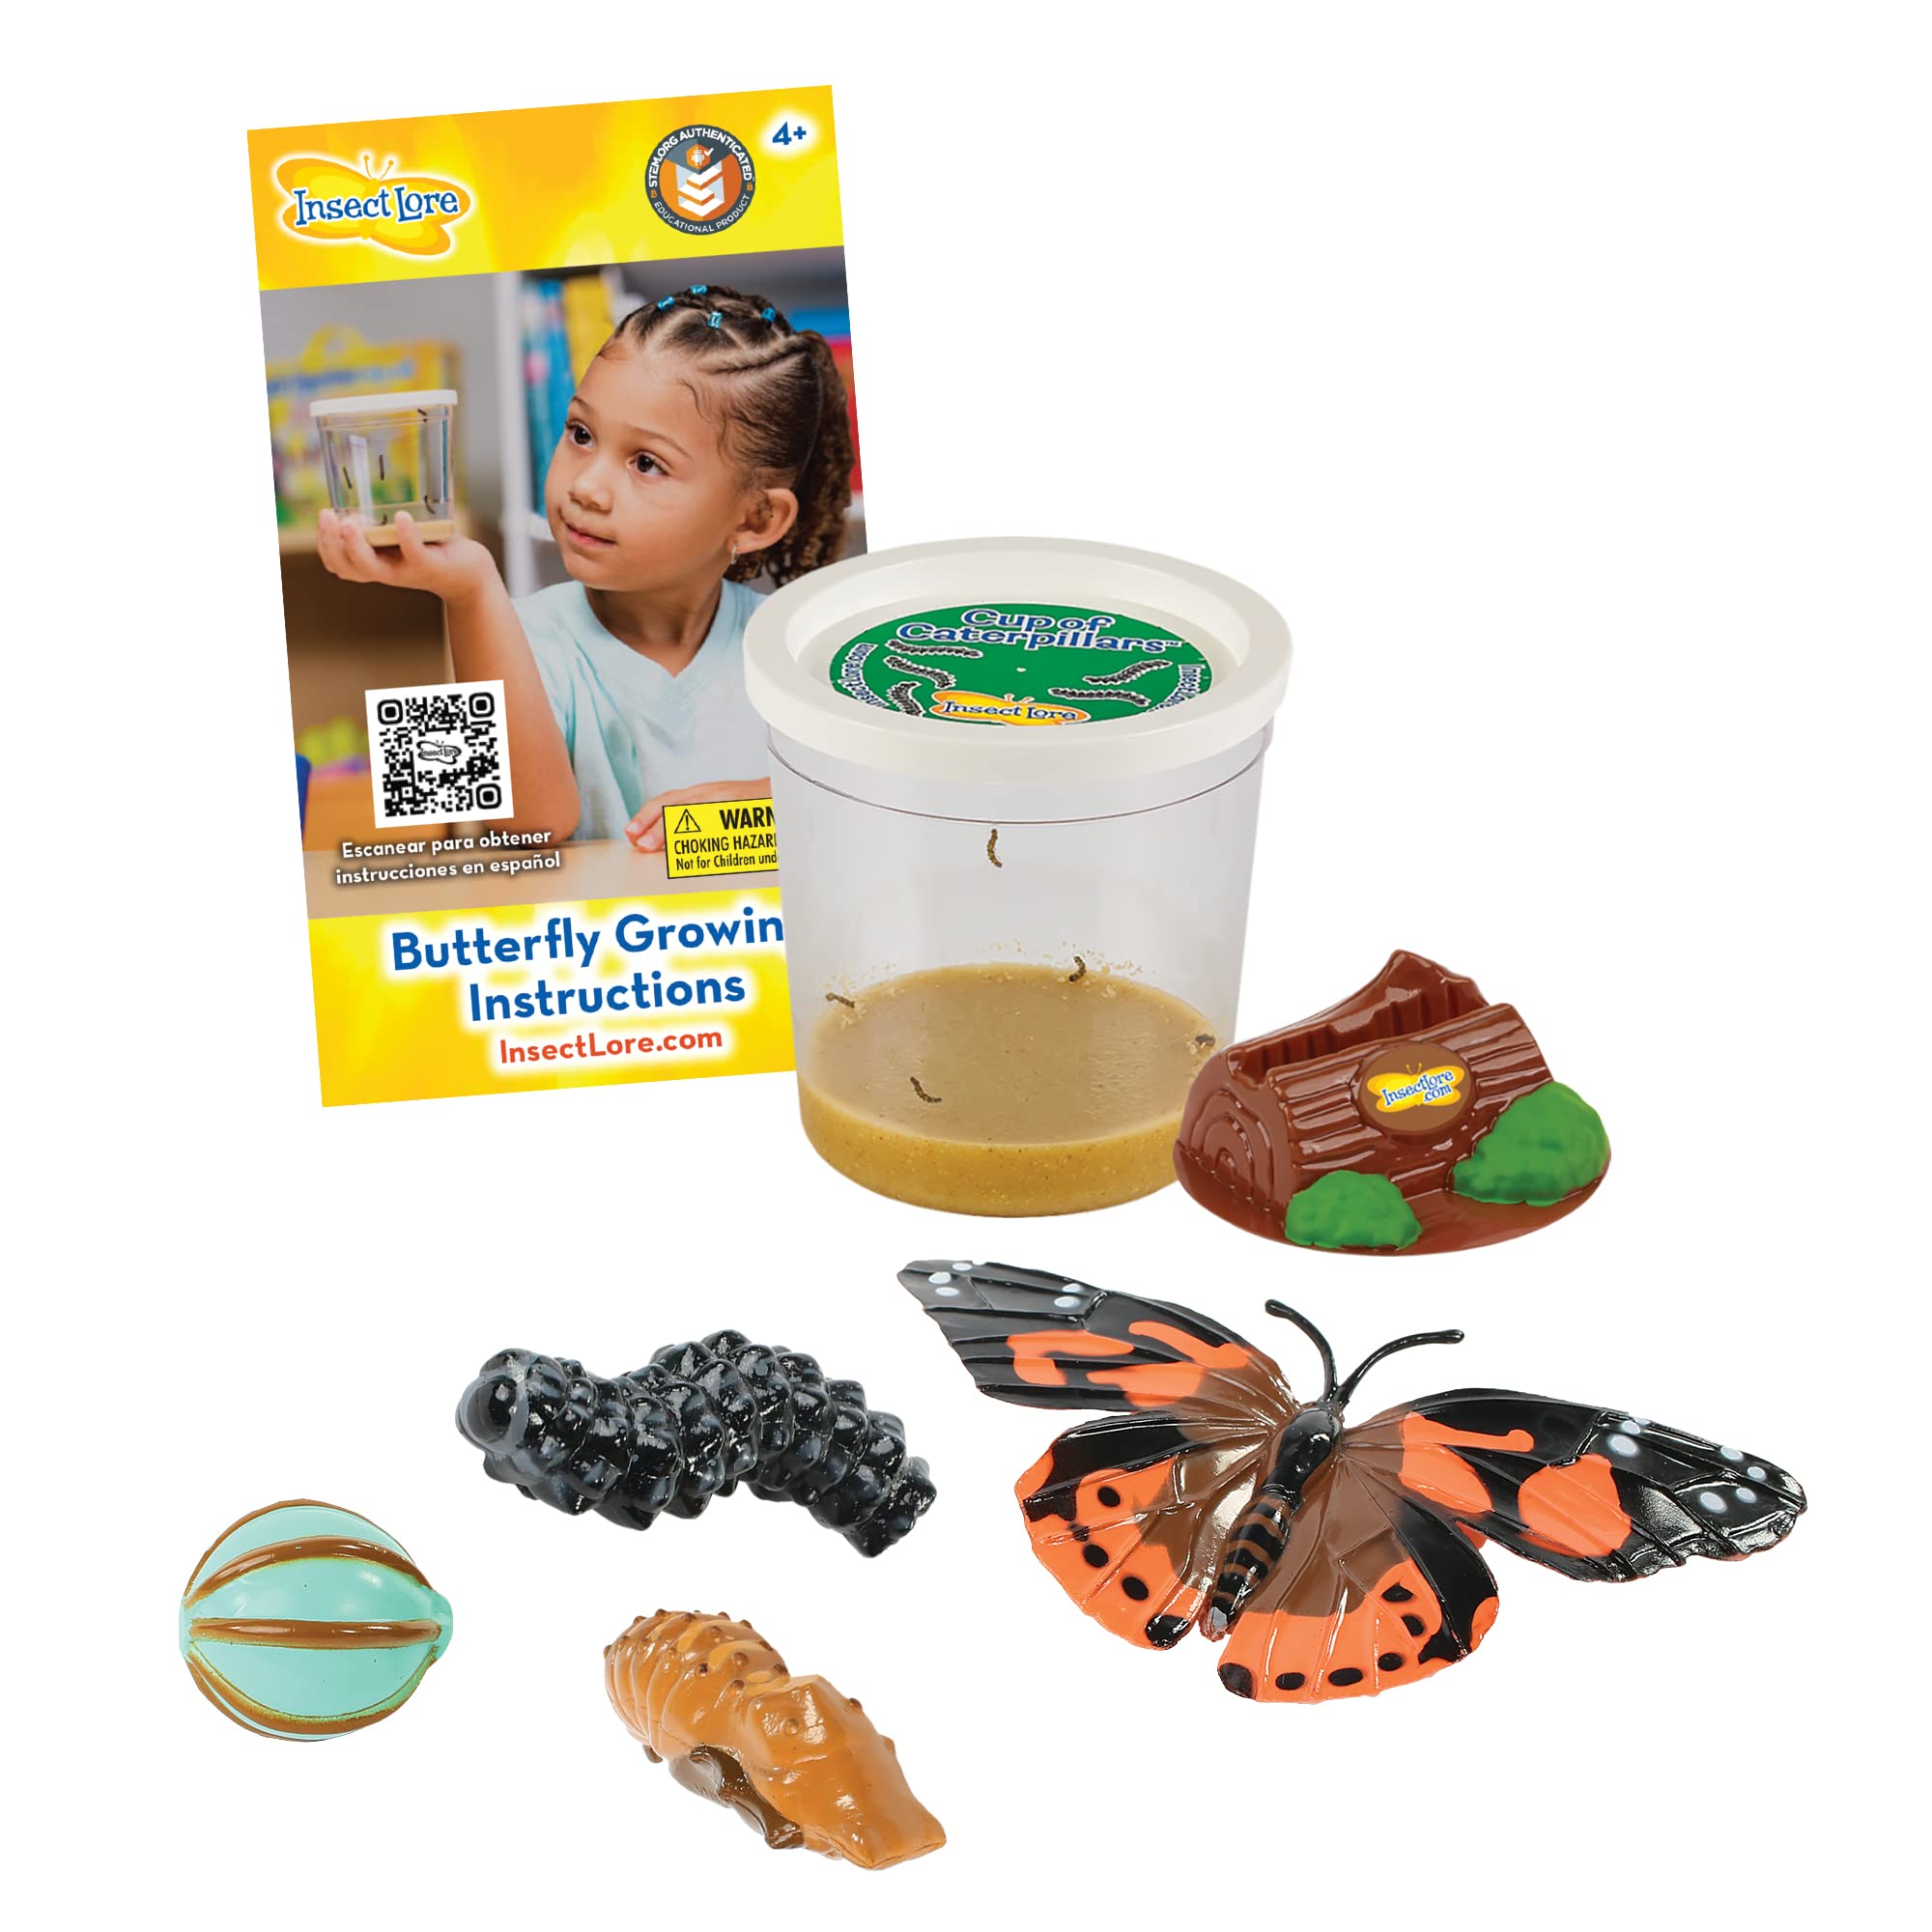 Book Cover Insect Lore 5 Live Caterpillars Cup of Caterpillars Butterfly Kit Refill - Plus Butterfly Life Cycle Stages Toy Figurines - Shipped Now